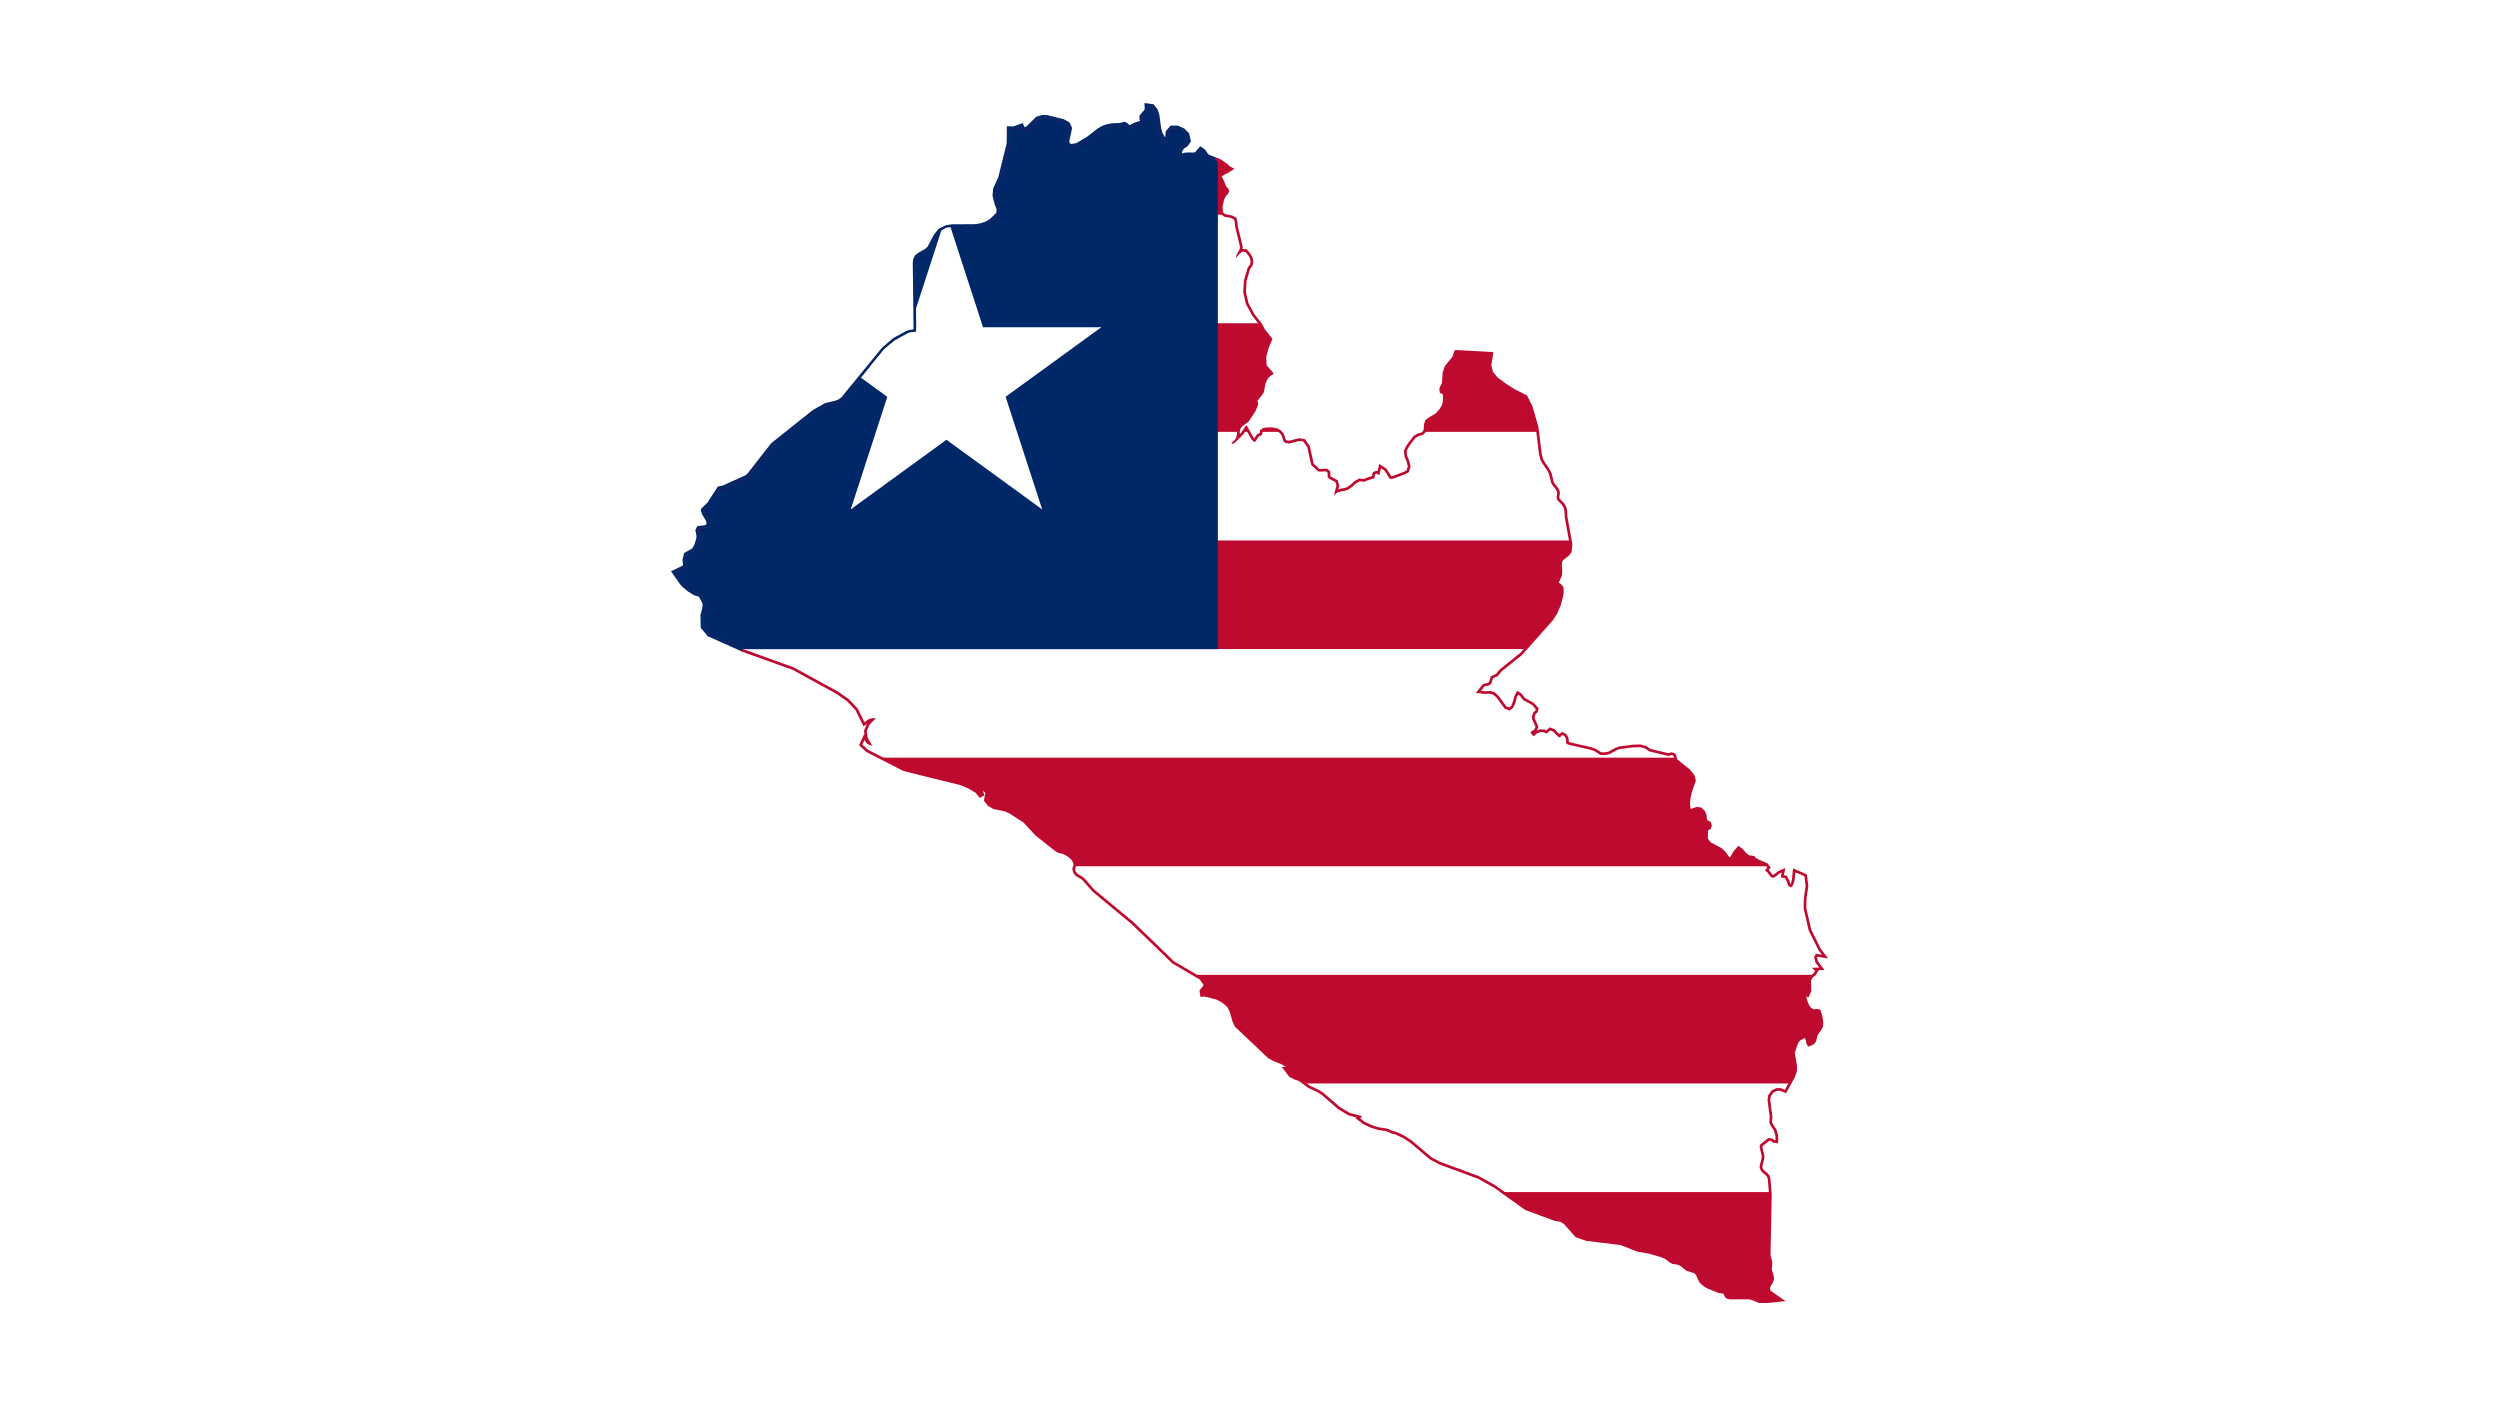 Liberia country outline with flag overlay